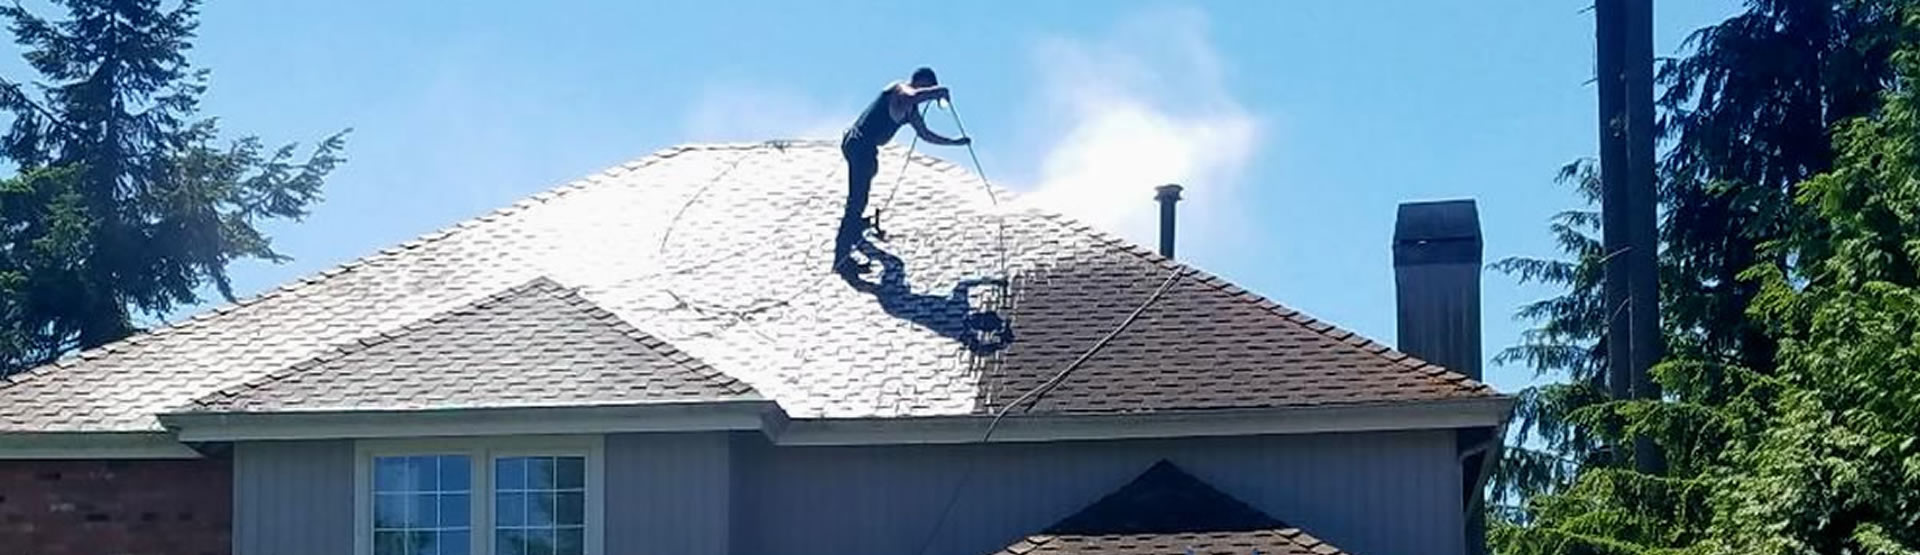 A roofer on top of a house repairing the roof.